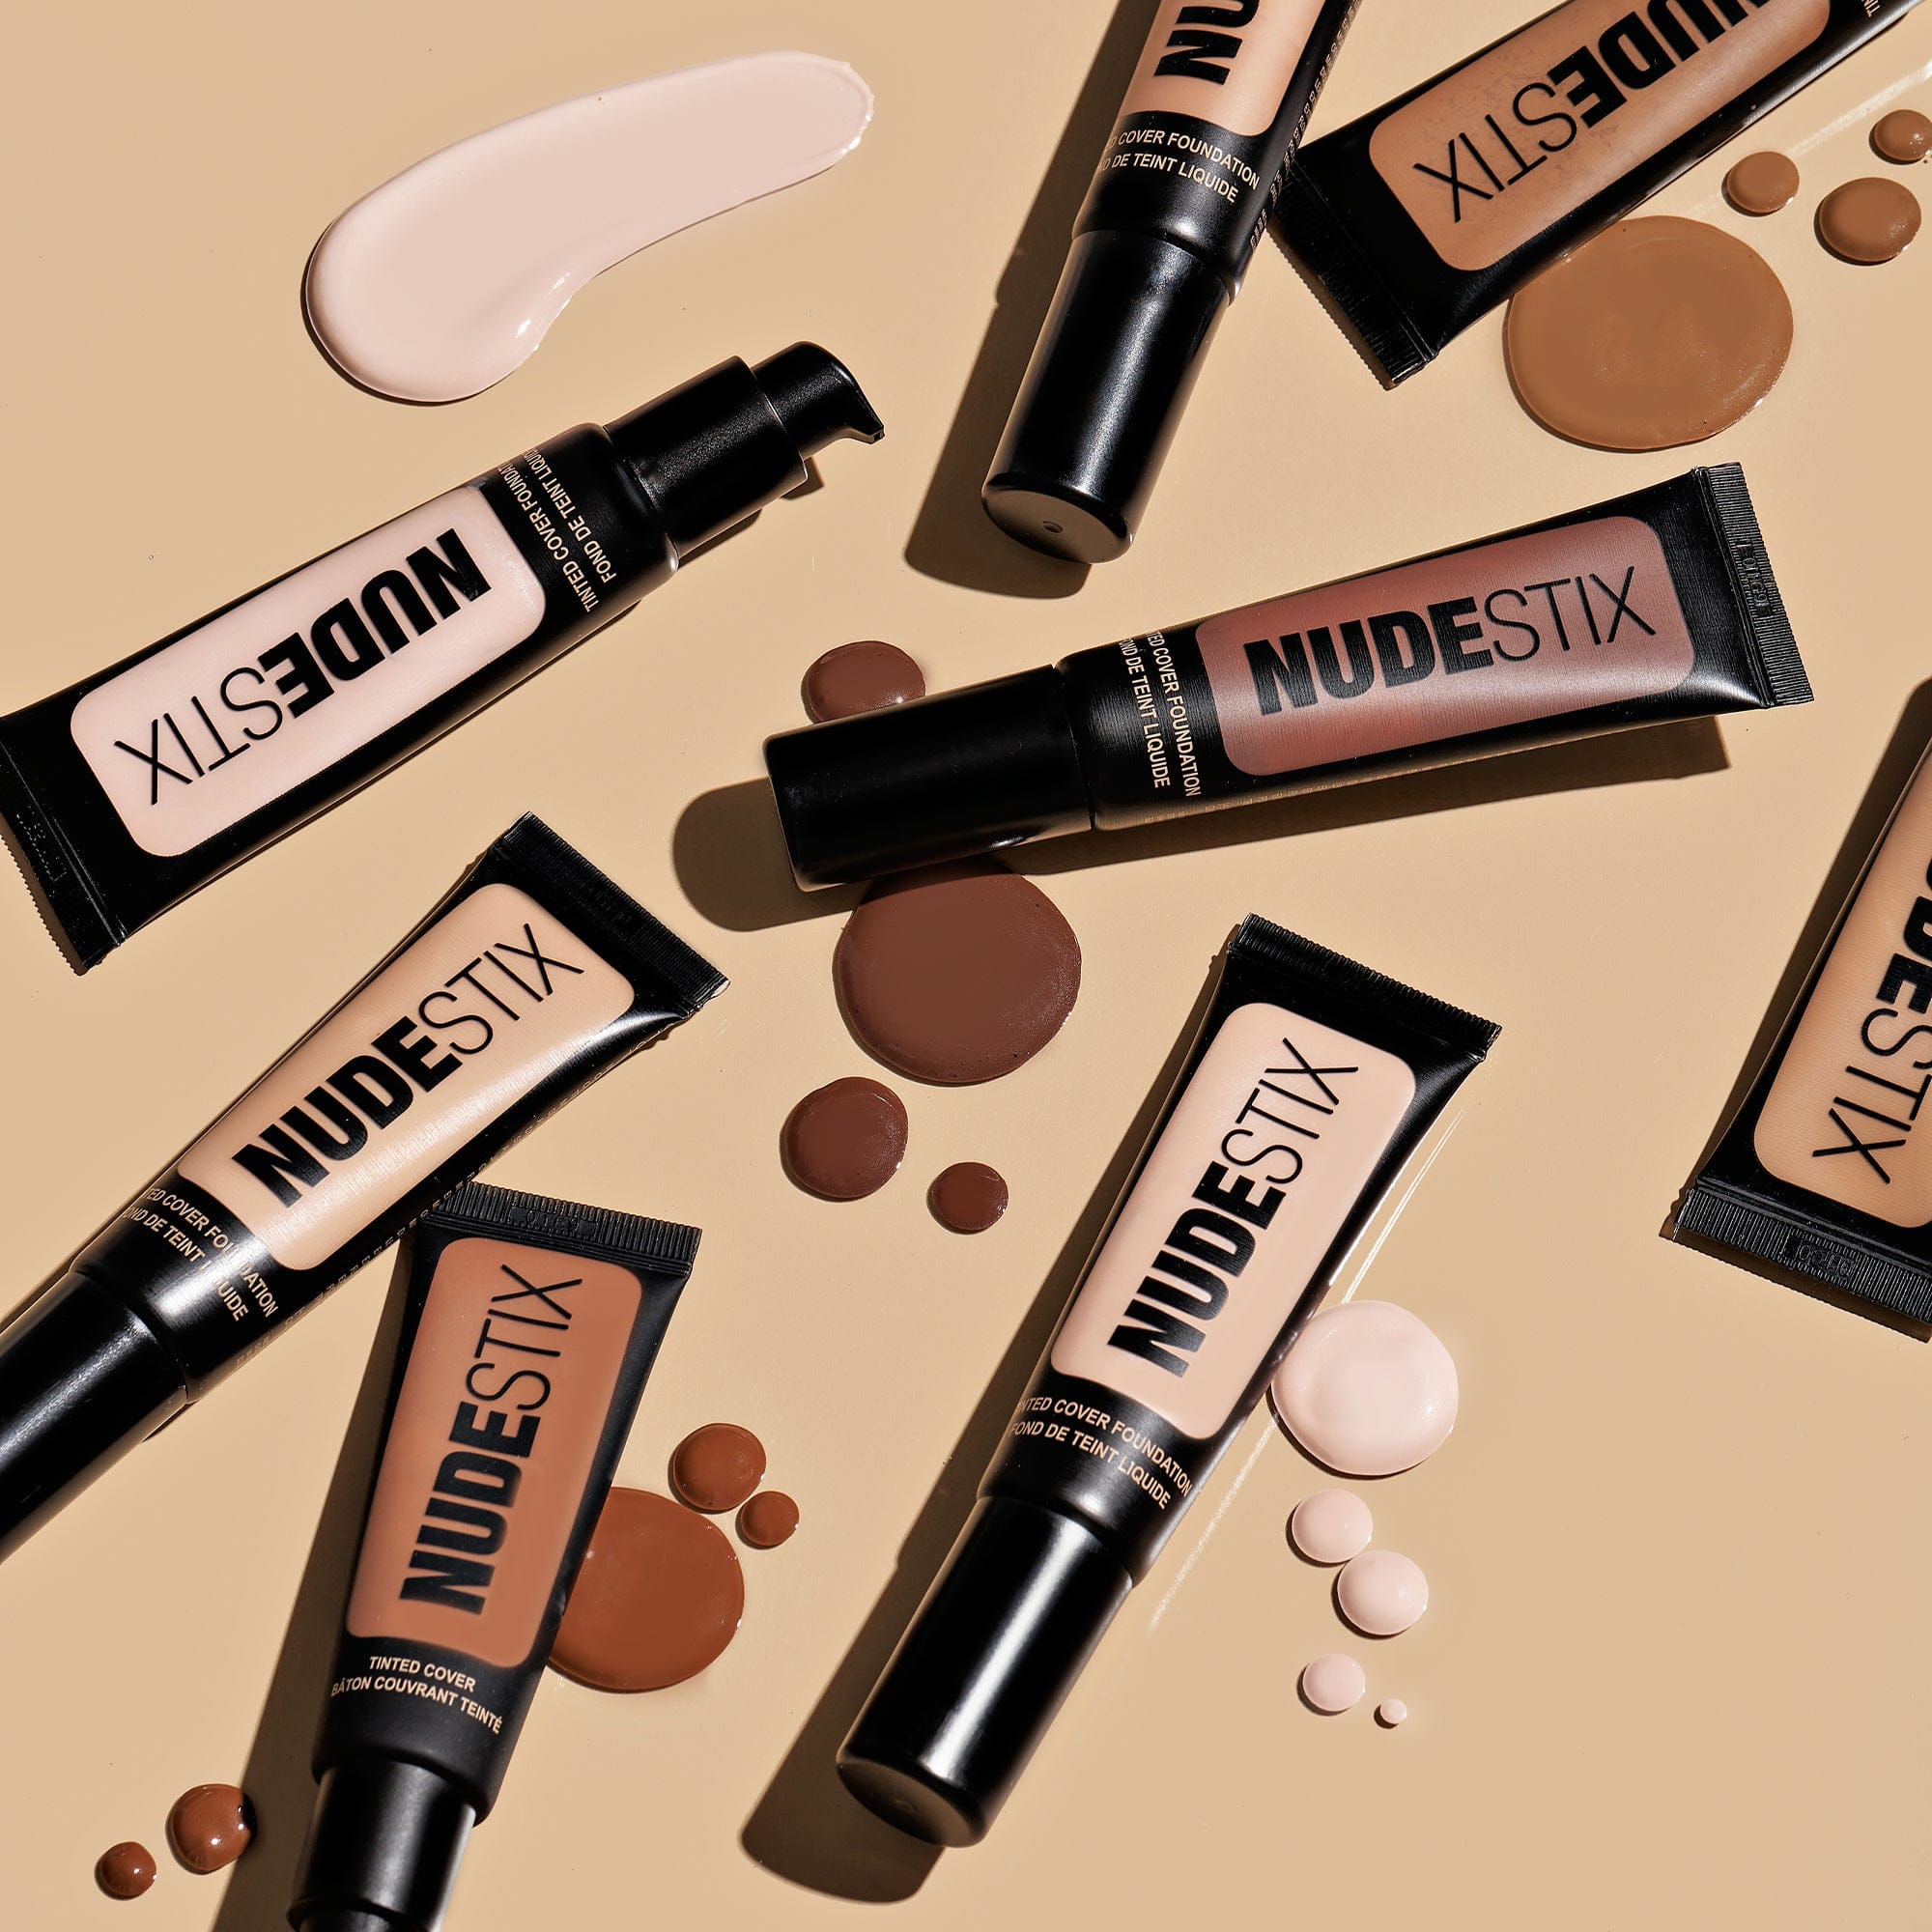 Tinted Cover Liquid Foundation in shade Nude 2.5 flat lay